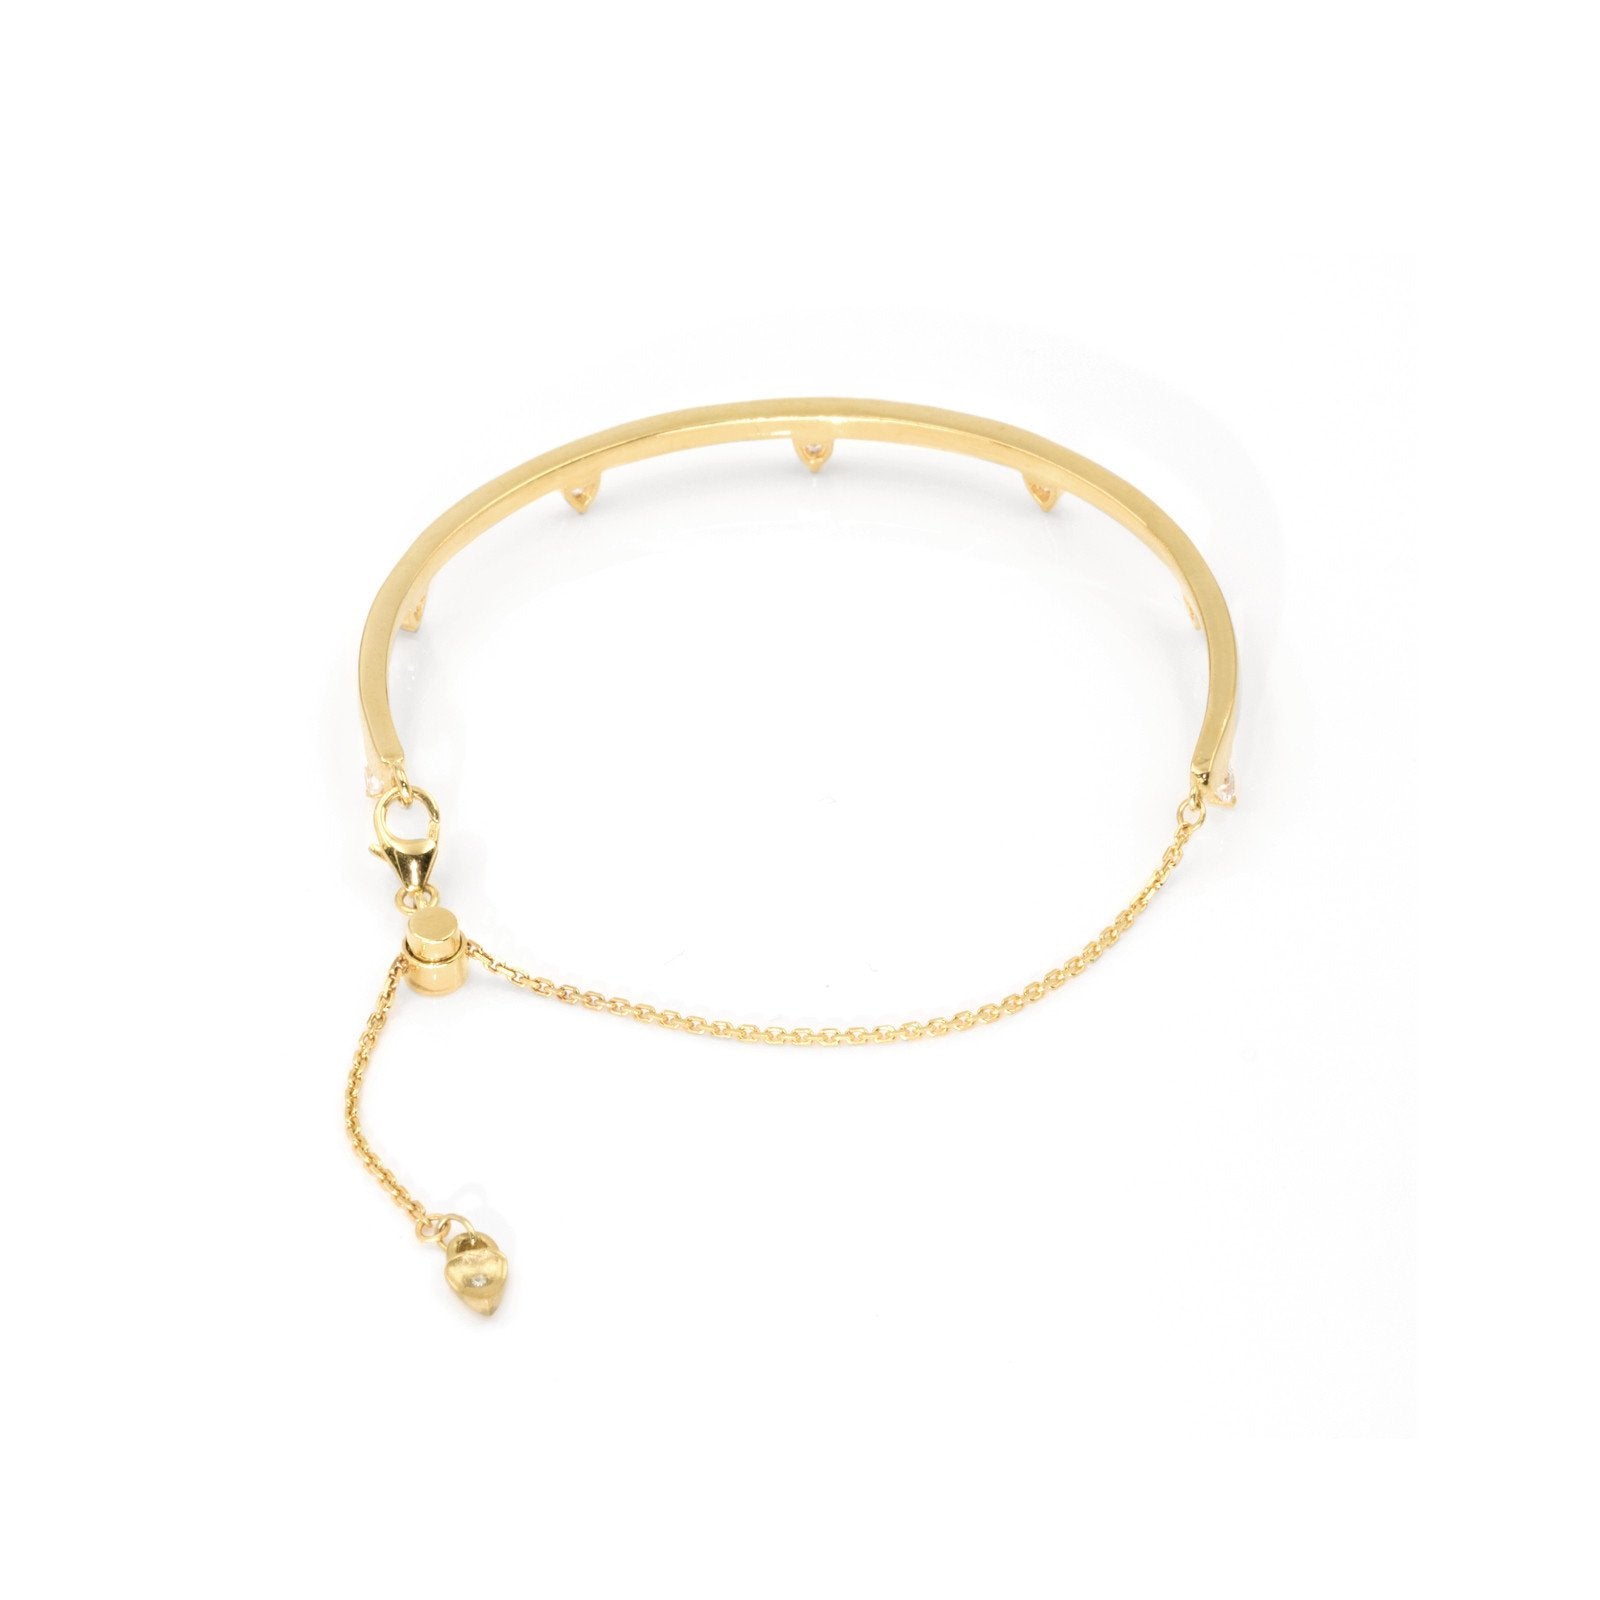 Theia - Vermeil & Sterling Silver Station Bracelet - Camille Jewelry